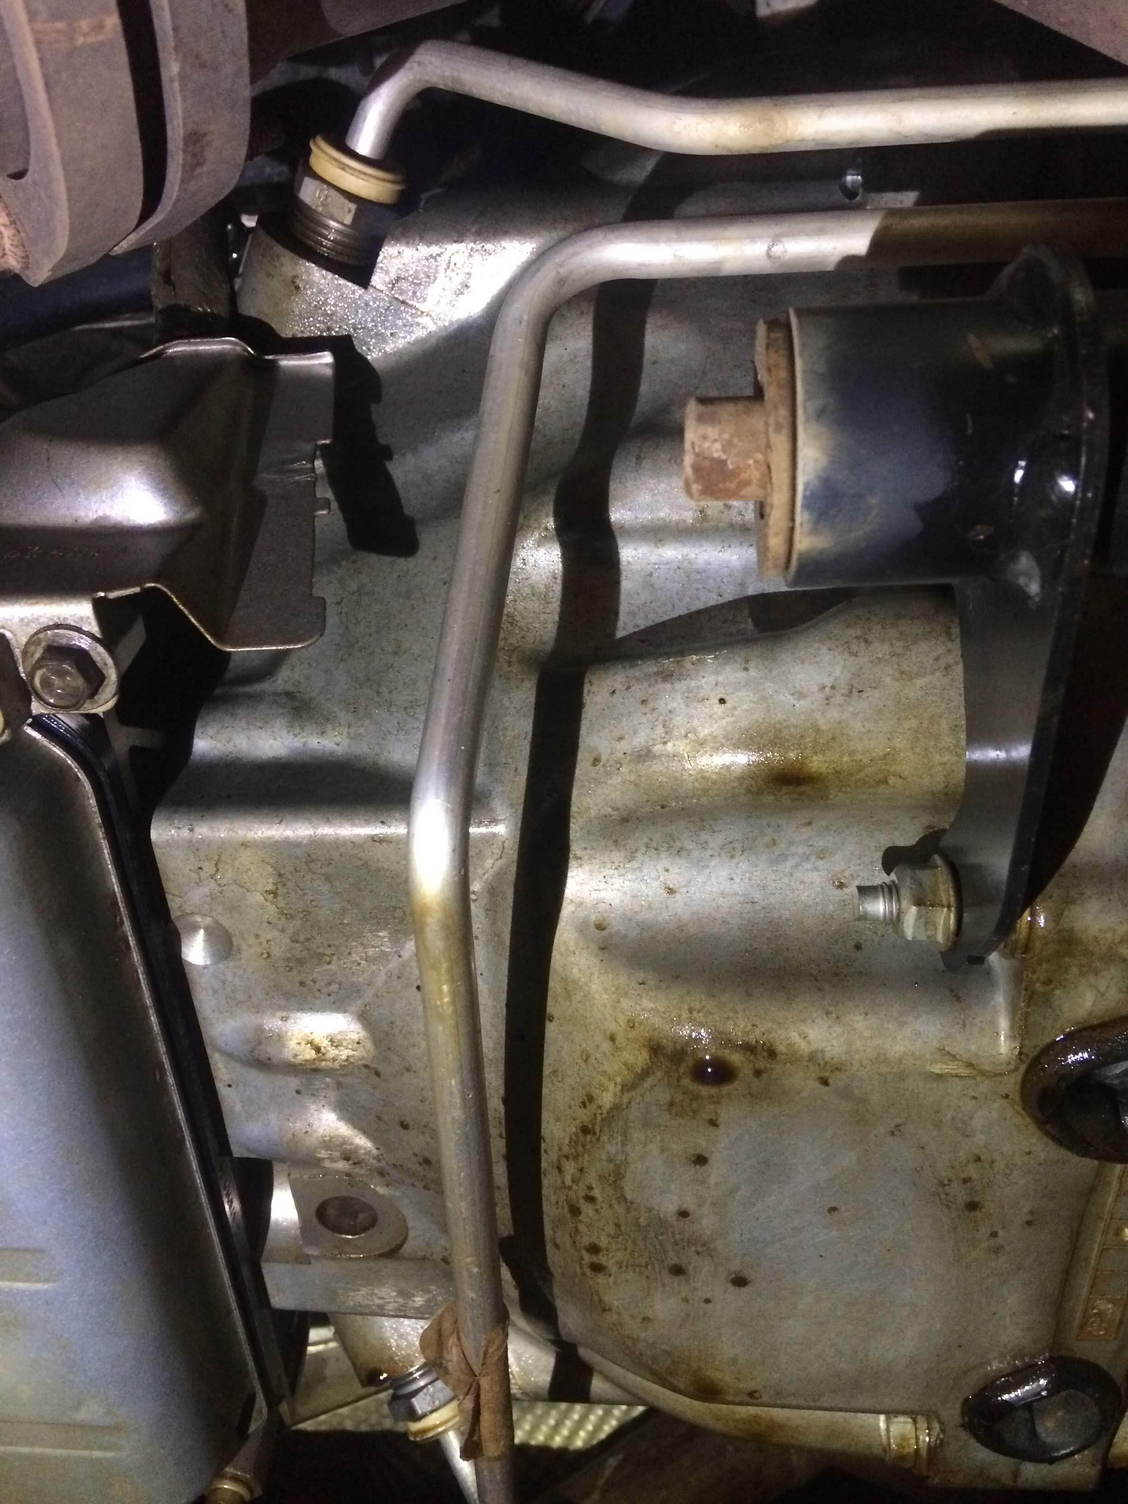 2014 2-door JK oil cooler leak at fitting  - The top  destination for Jeep JK and JL Wrangler news, rumors, and discussion